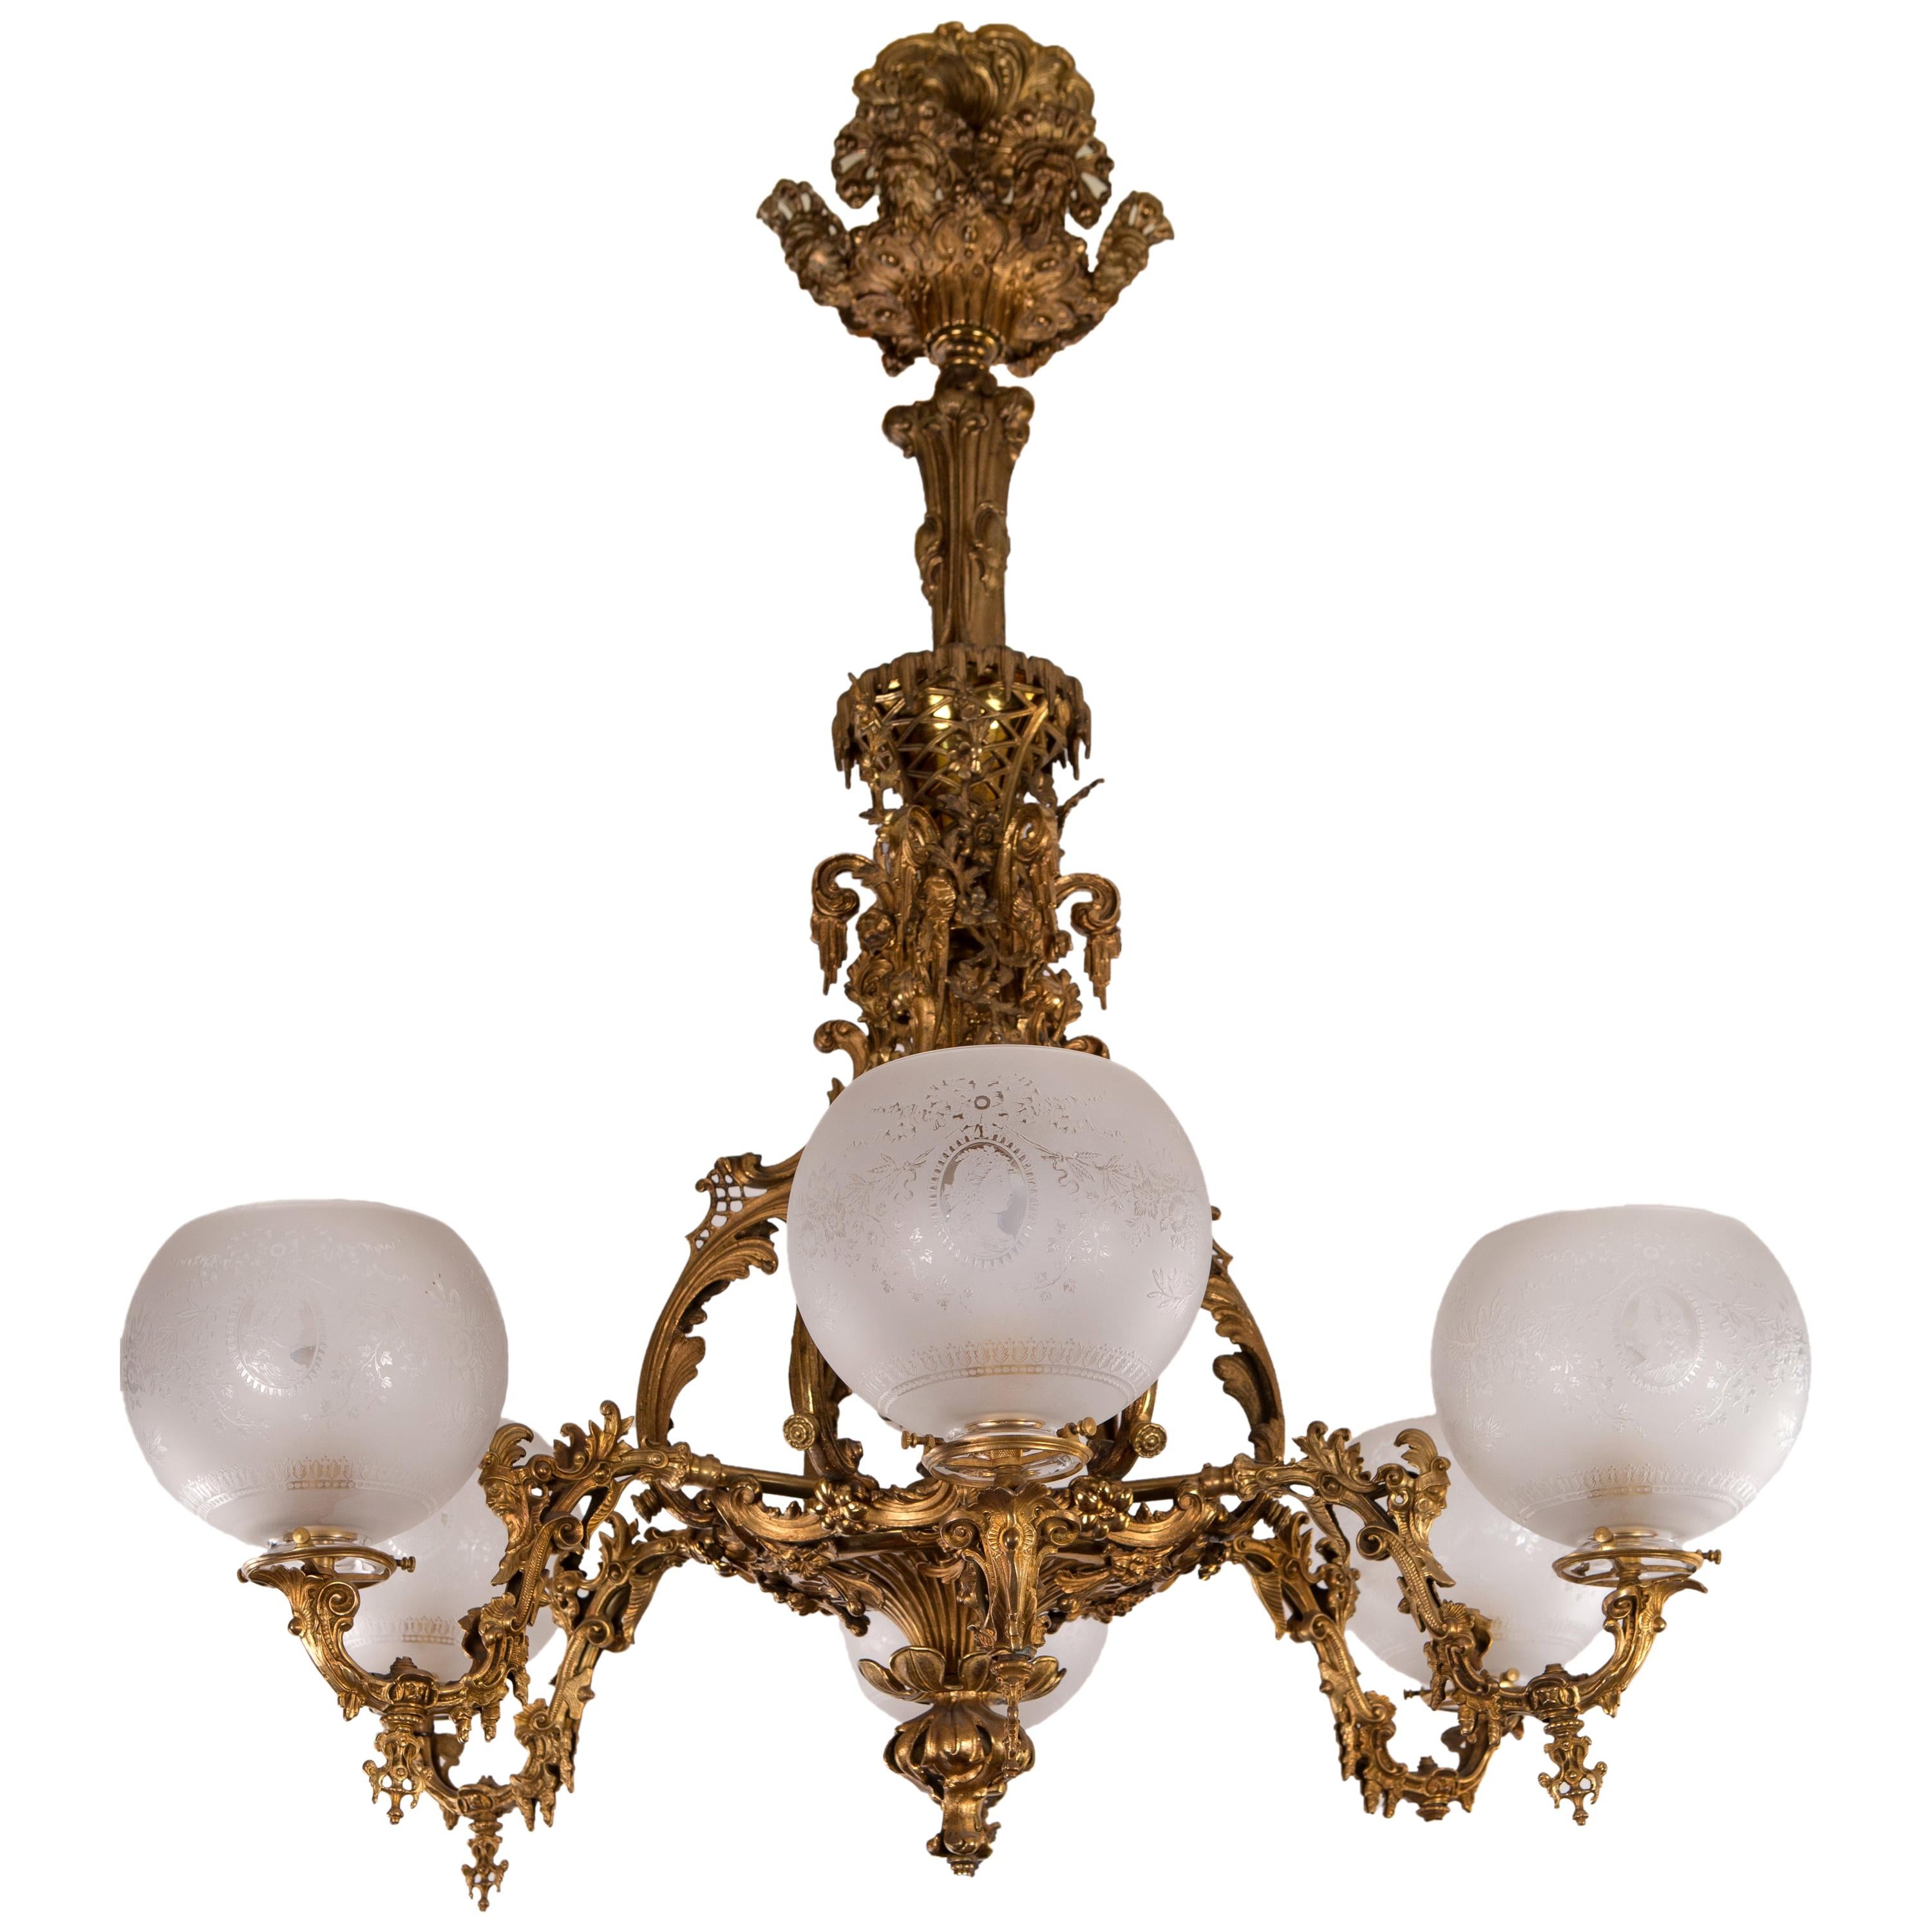 19th Century Cornelius and Company Rococco Revival Six Light Chandelier For Sale